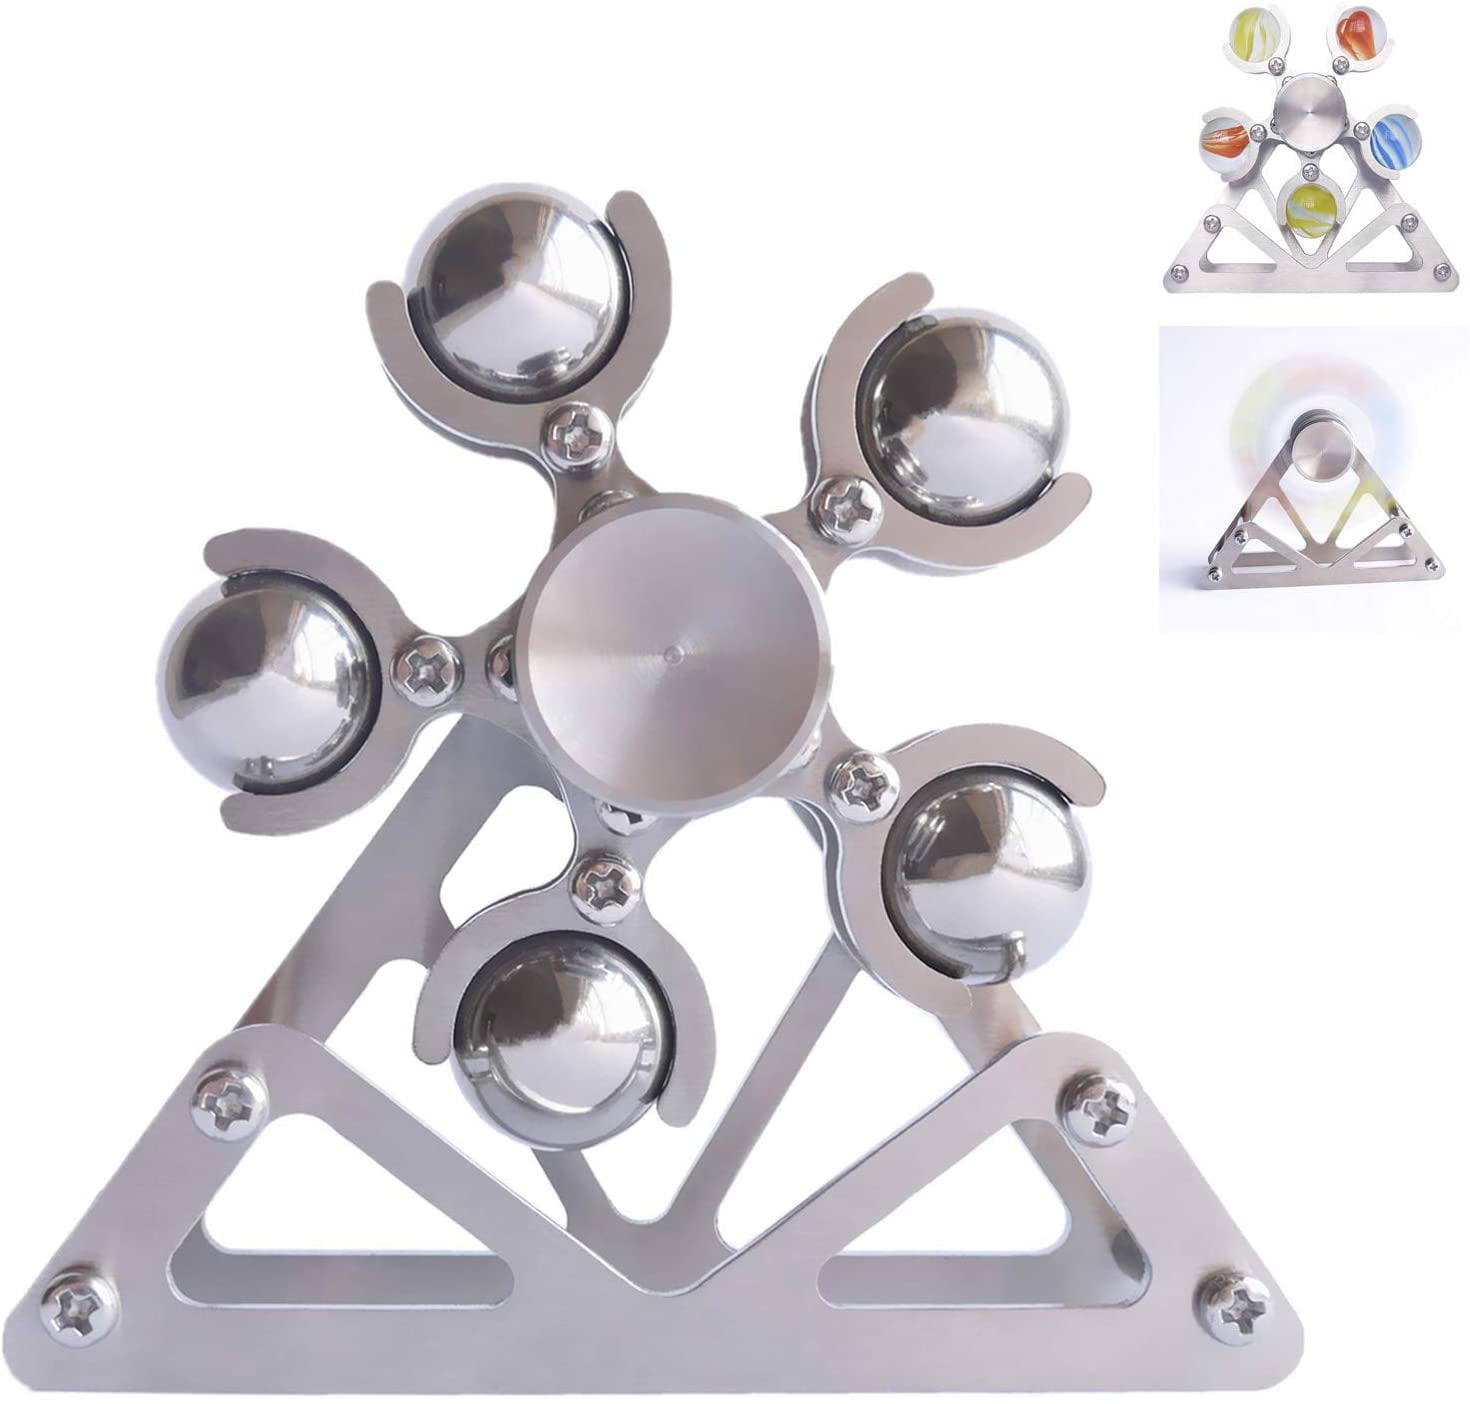 Unique Kinetic Spinning Desk Toy Anti-stress Reliever Fidget Spinner Finger Toys 